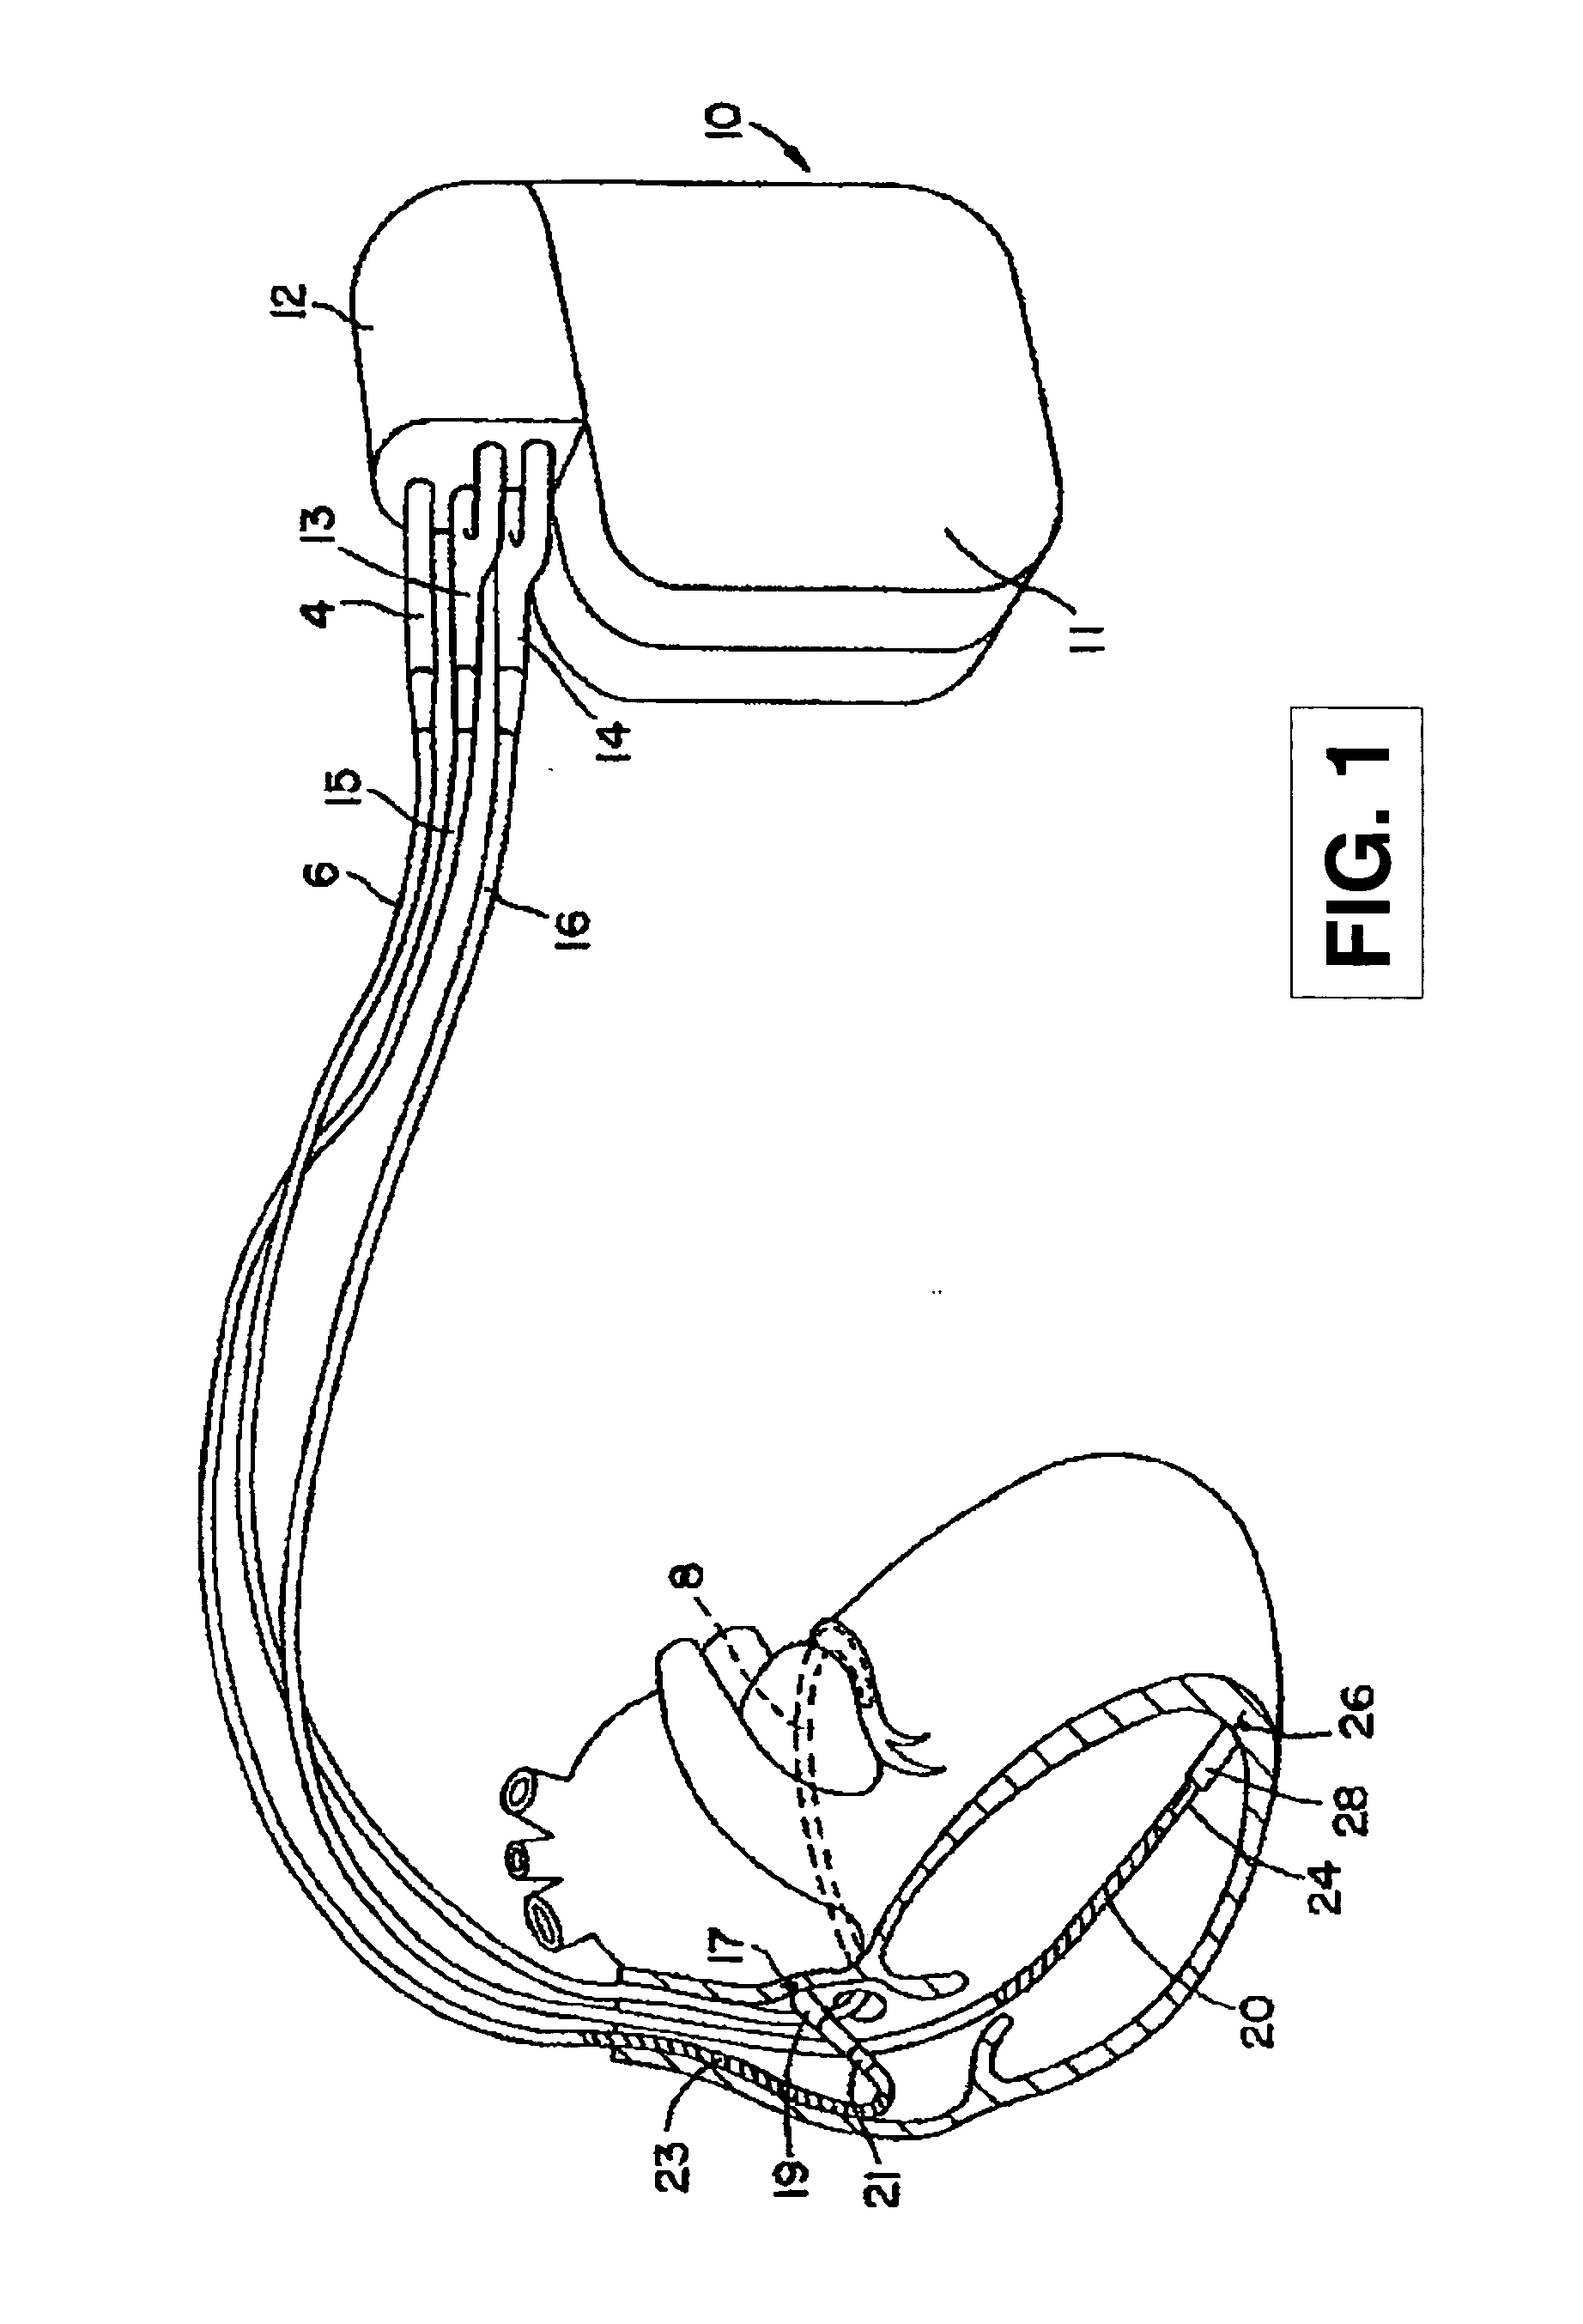 Method and apparatus for generating a template for arrhythmia detection and electrogram morphology classification